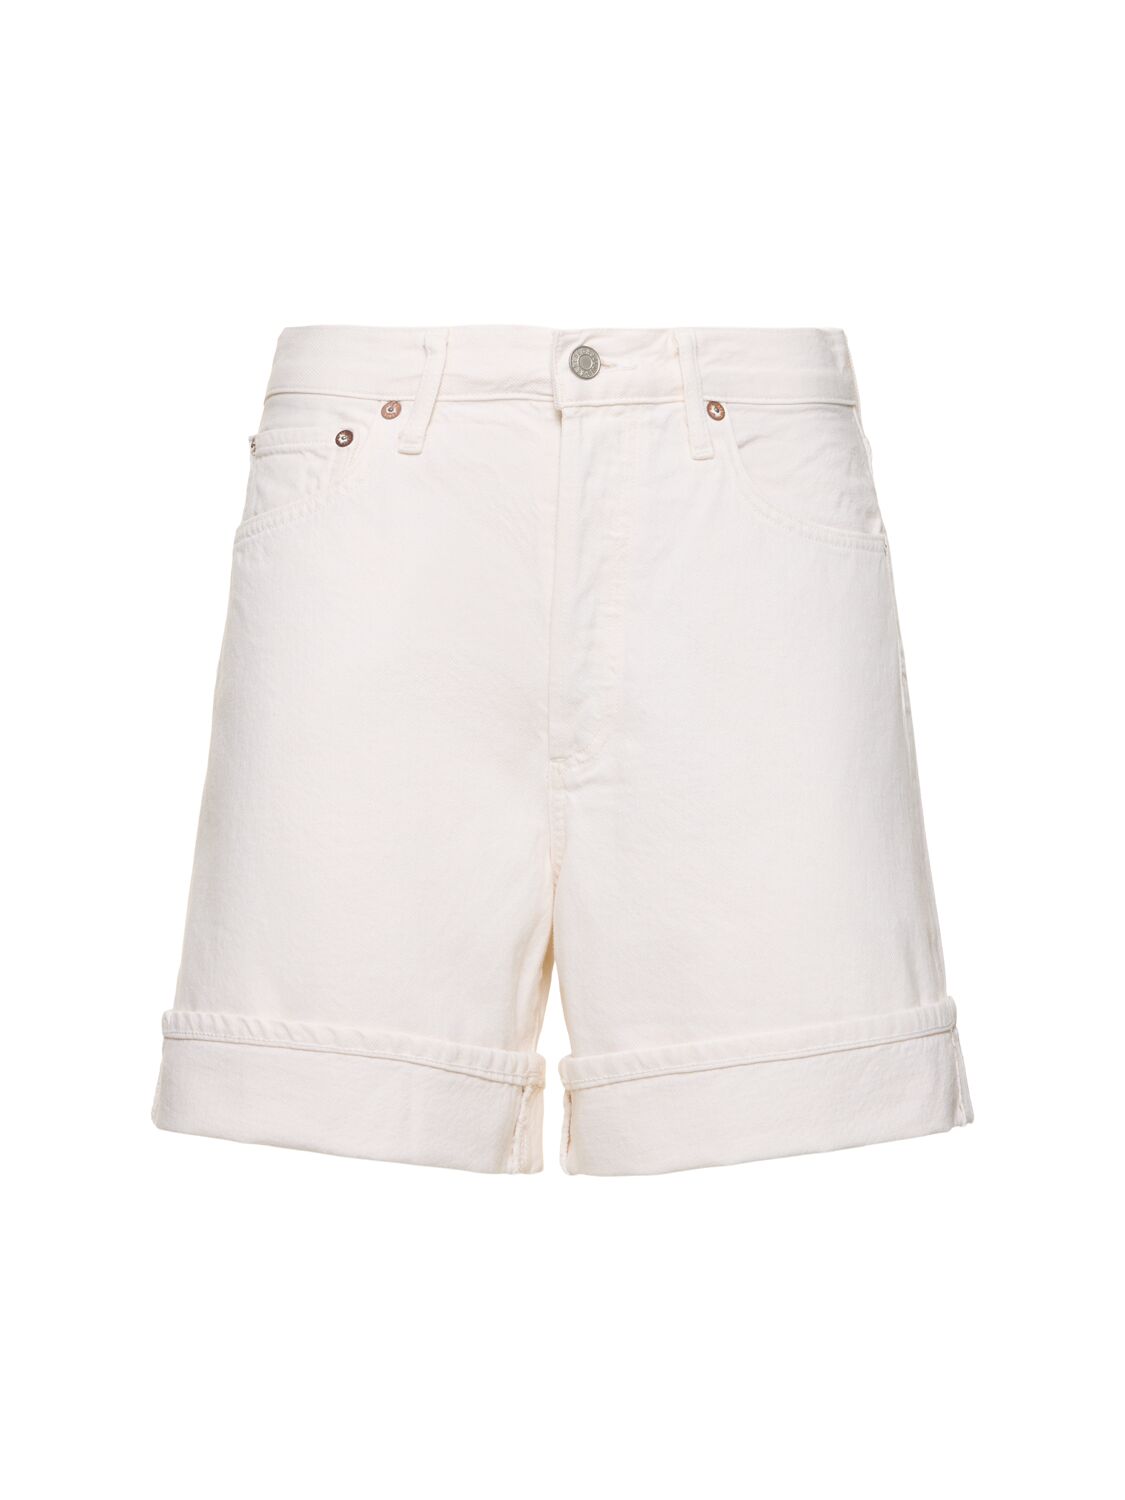 Agolde Dame Organic Cotton Wide Shorts In White